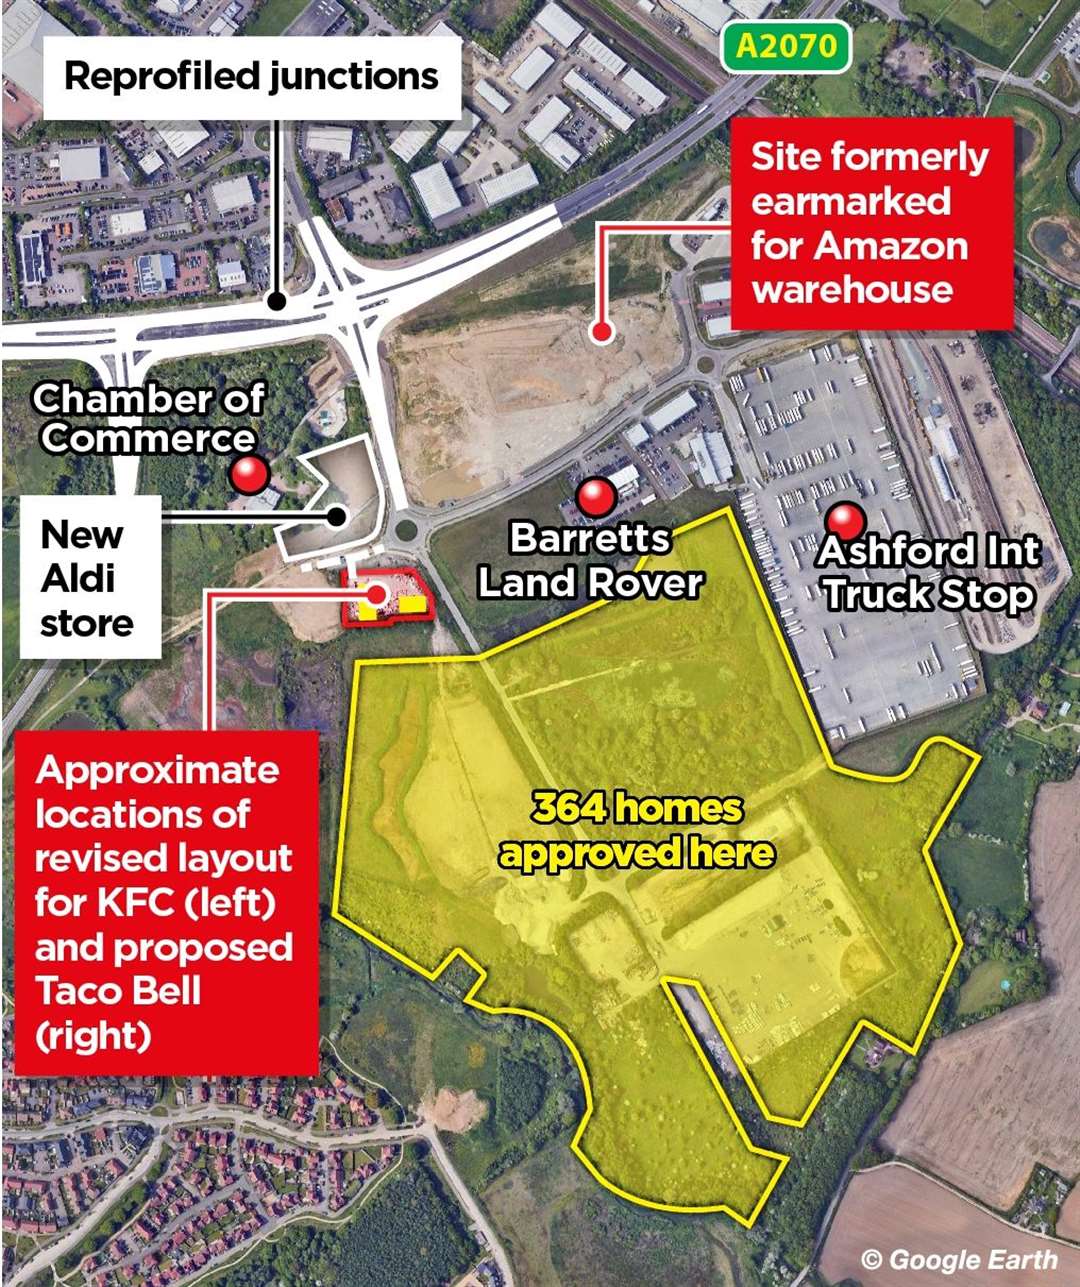 A map showing the layout of the Waterbrook Park development off the A2070 in Ashford